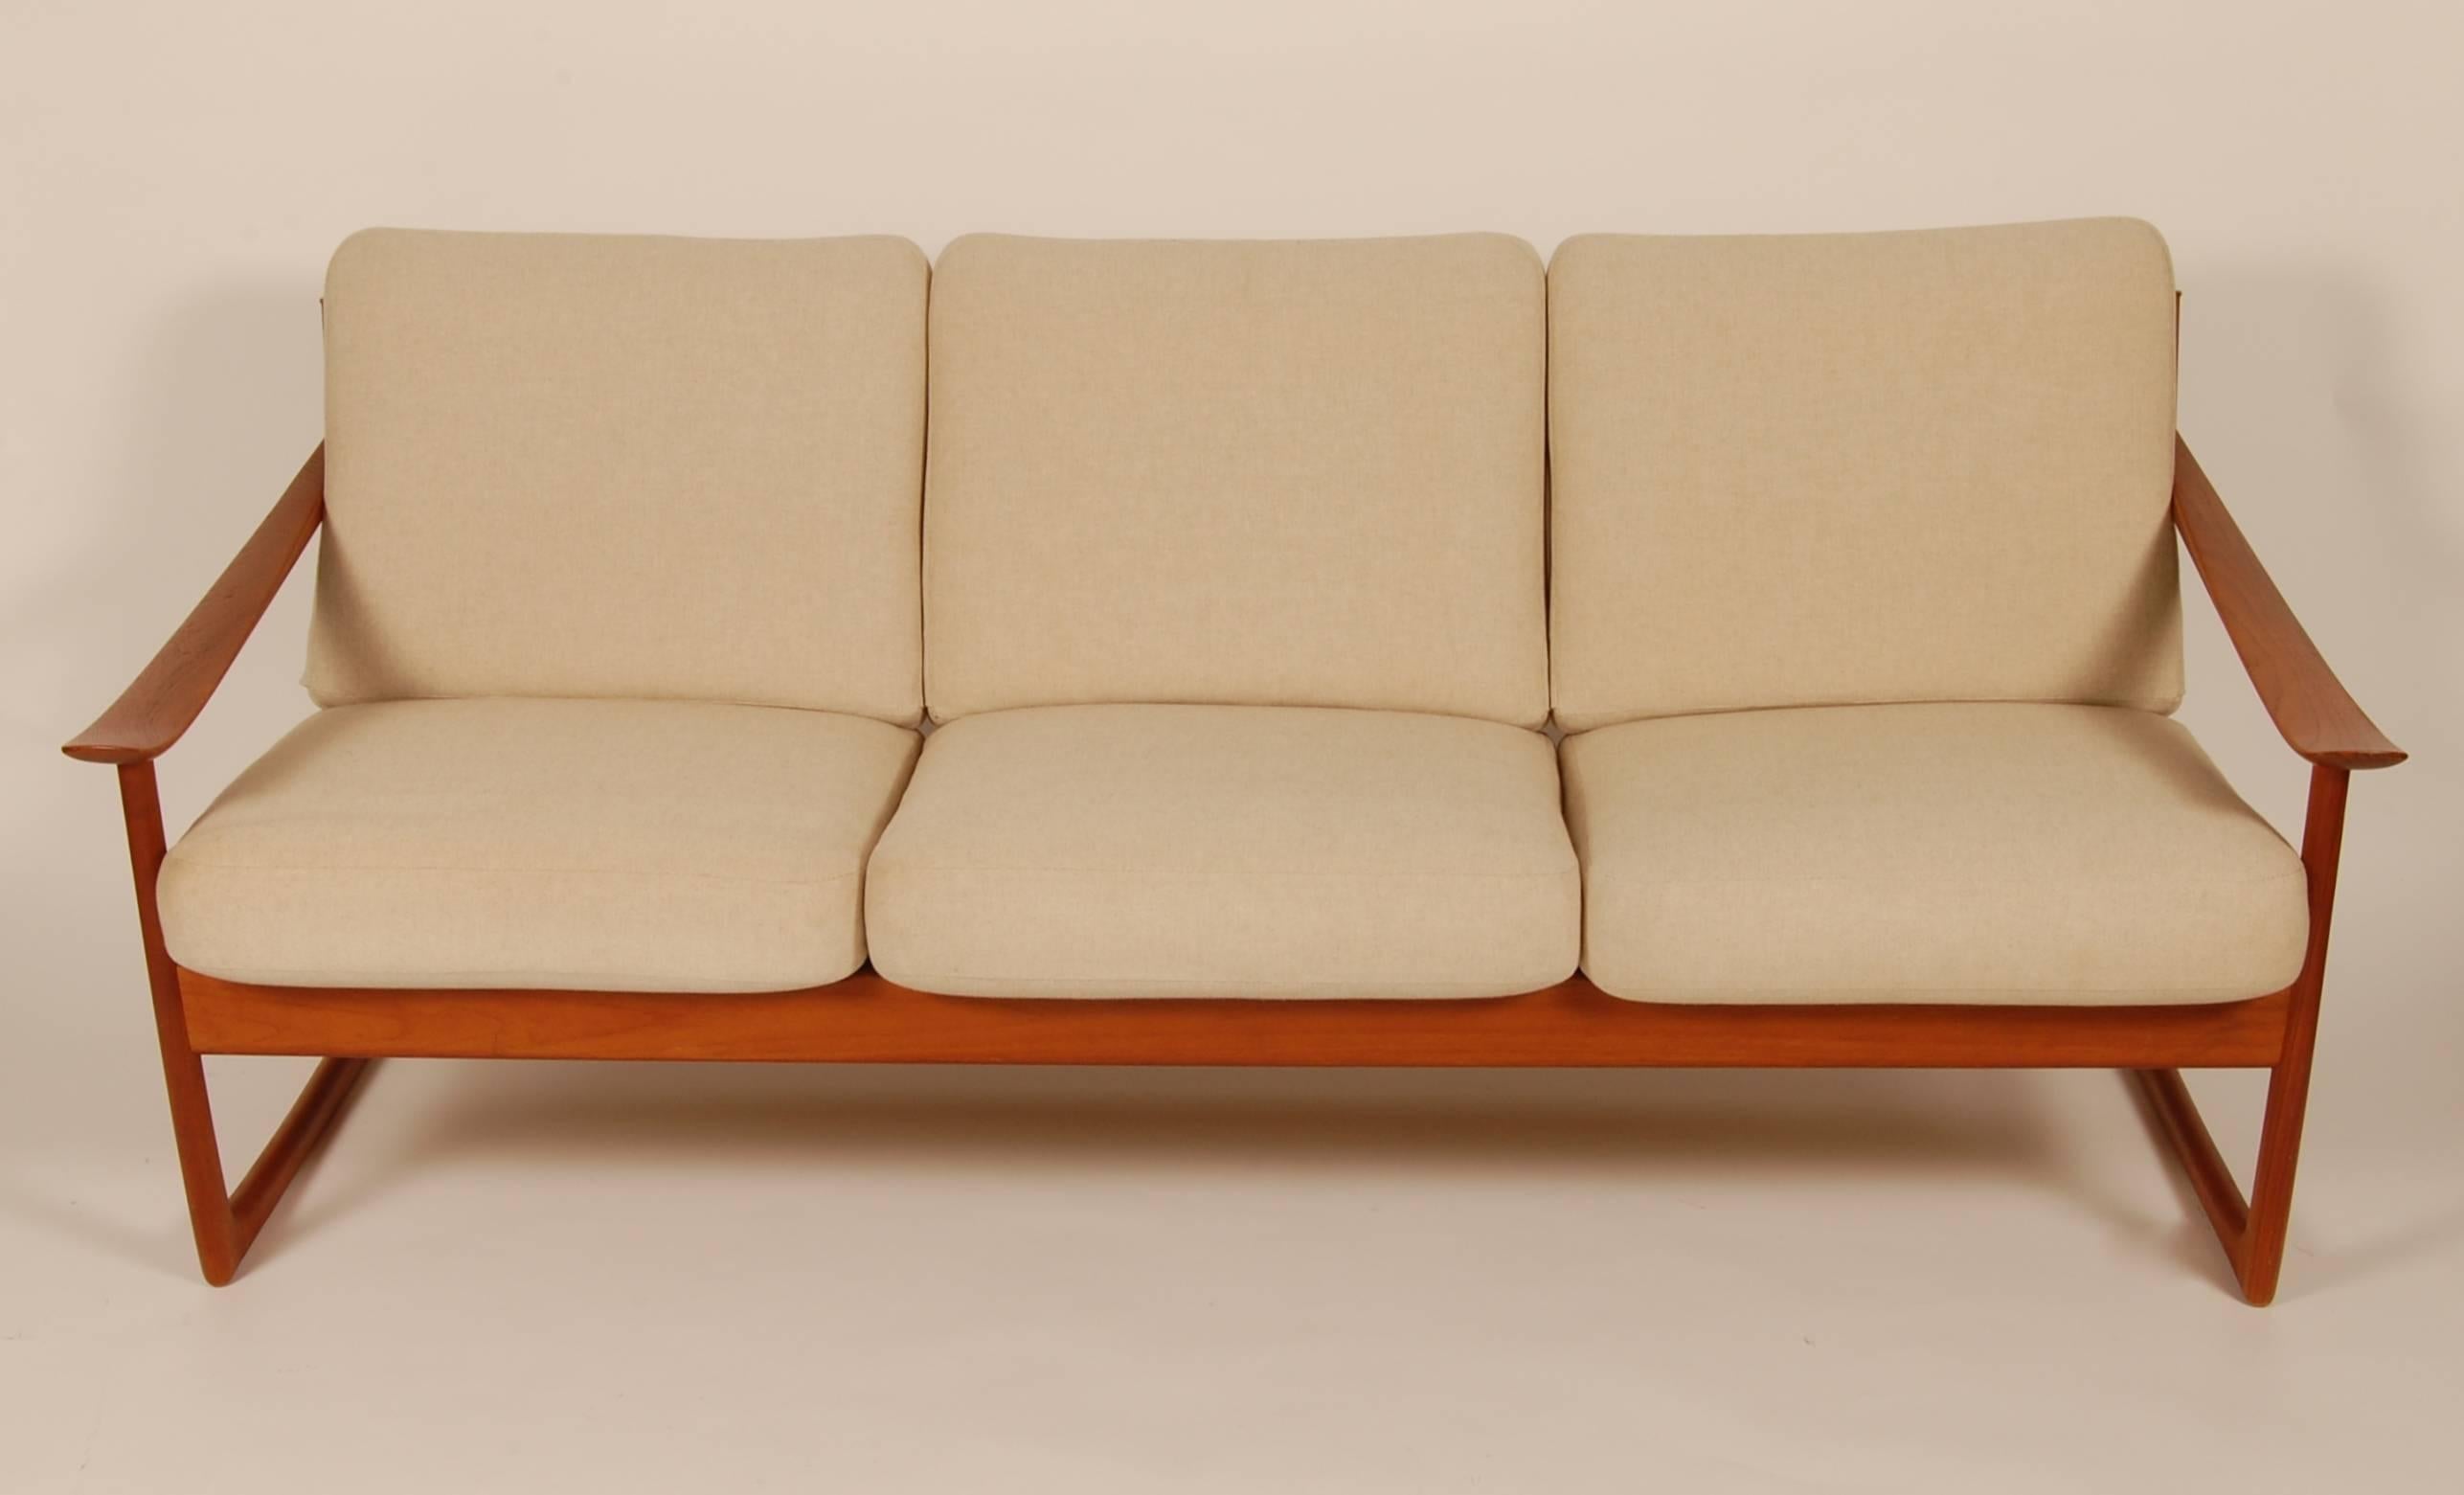 Three-seat sofa by architects Peter Hvidt and Orla Mølgaard, Nielsen, crafted by France and Son and imported for John Stuart Inc, New York, circa 1950s. The solid teak frame has a sled appearance, the back has cut a ways for the cushions to create a